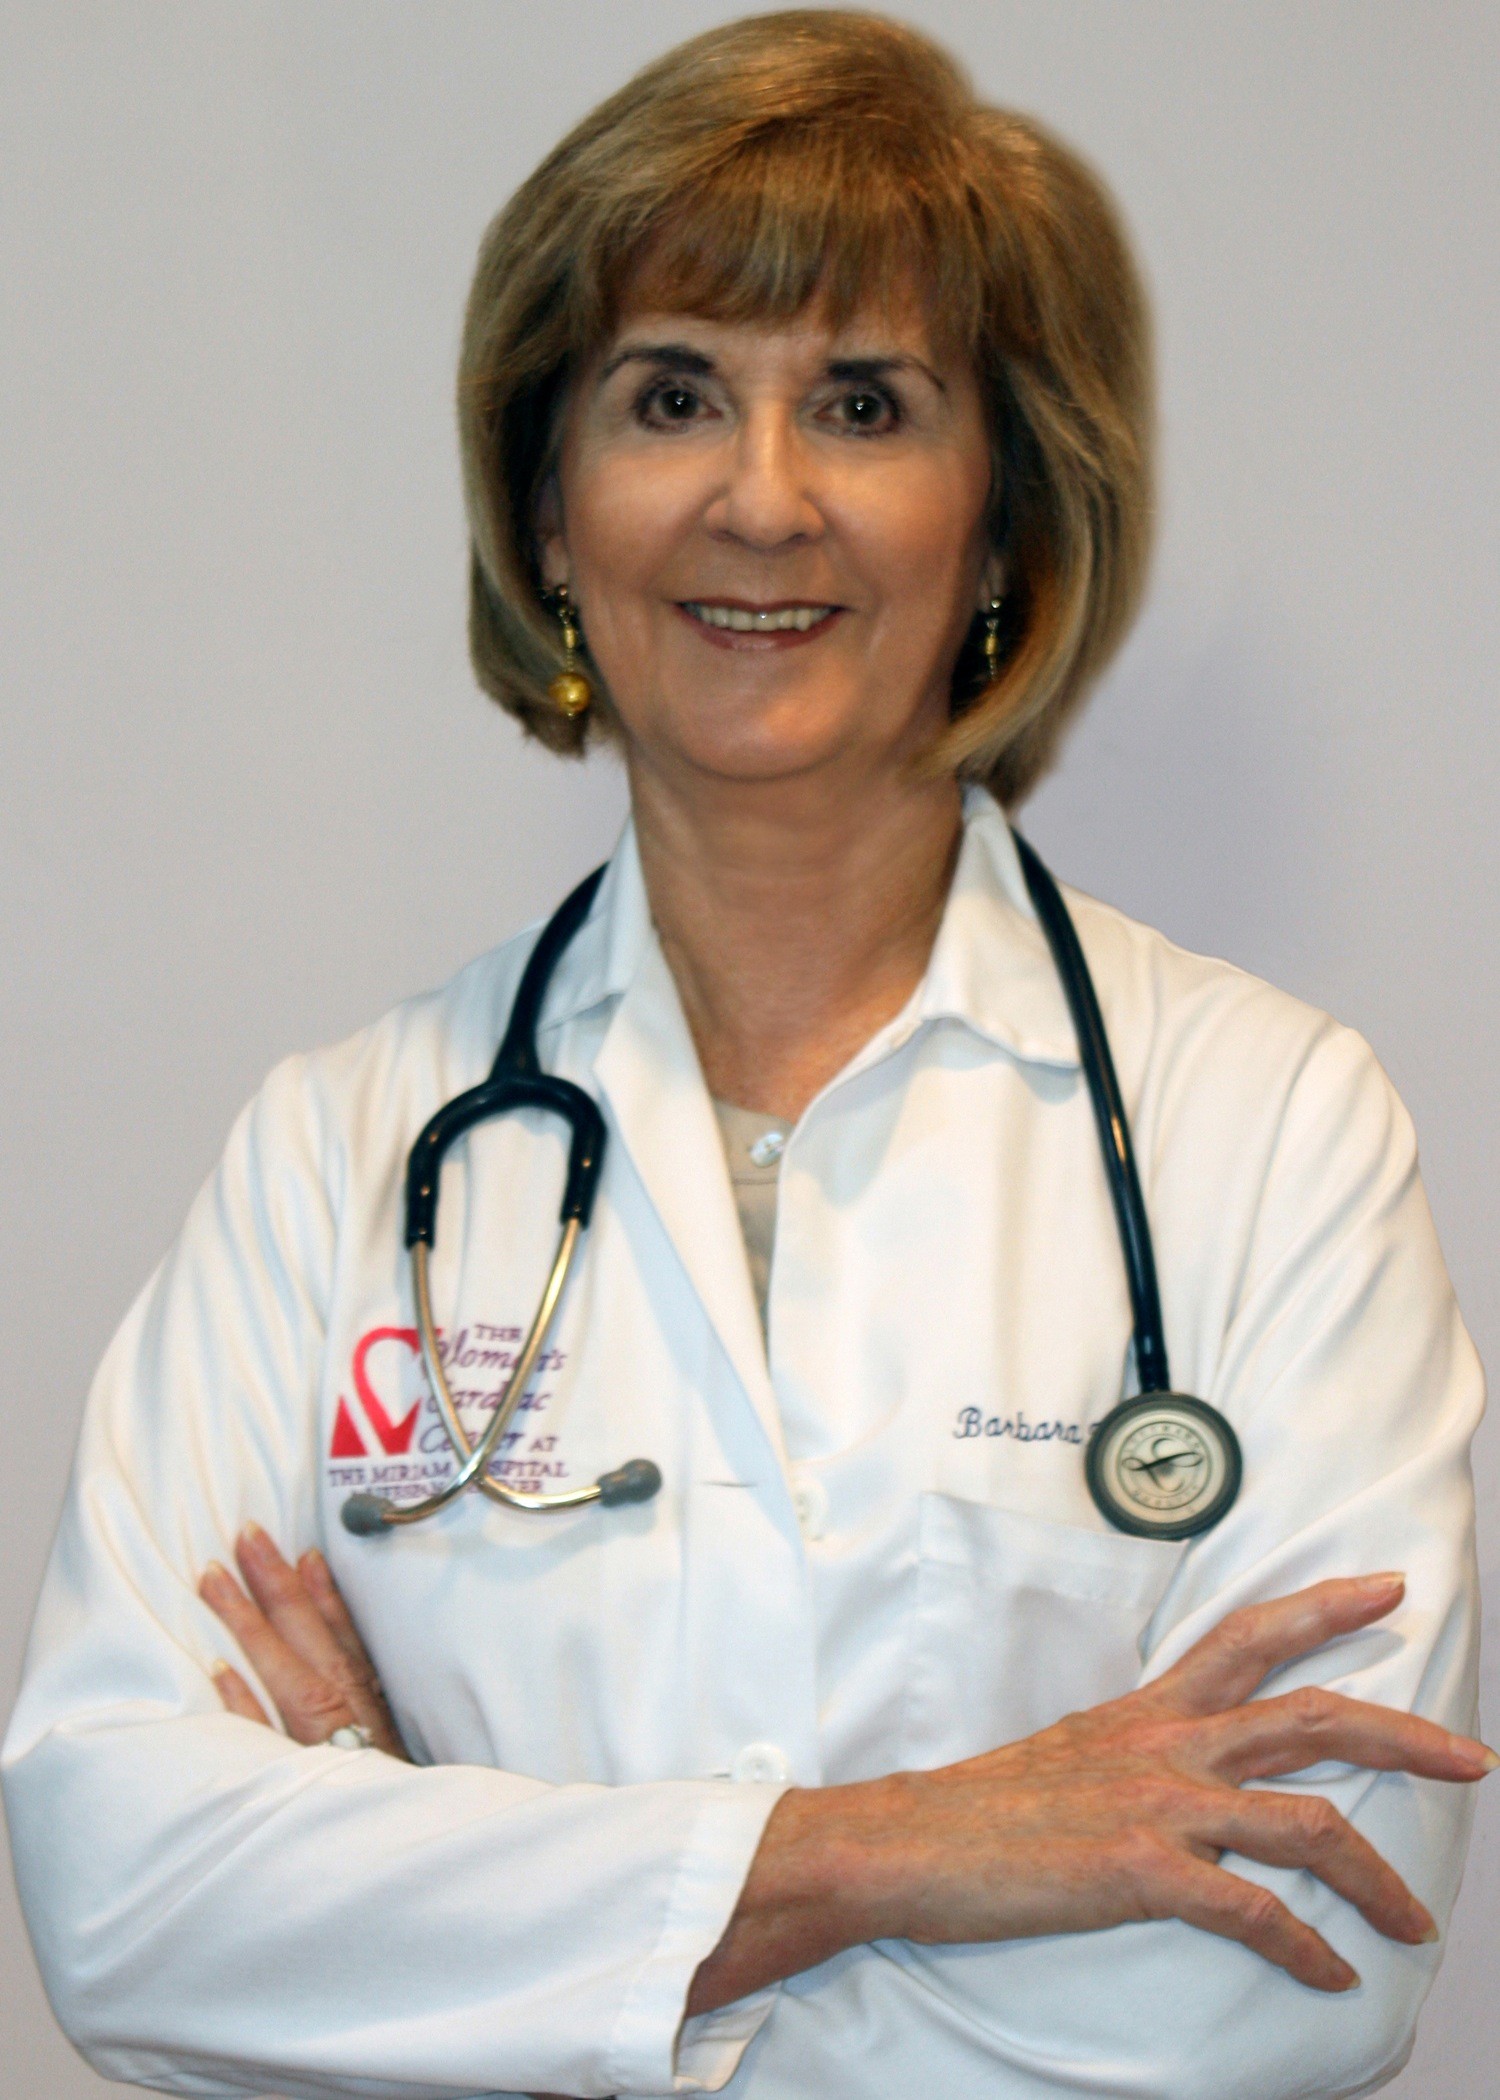 Dr. Barbara Roberts,  cardiologist who is associate clinical professor of Medicine at the Alpert Medical School of Brown University, is the author of “The Truth about Statins: Risks and Alternatives to Cholesterol-Lowering Drugs.”